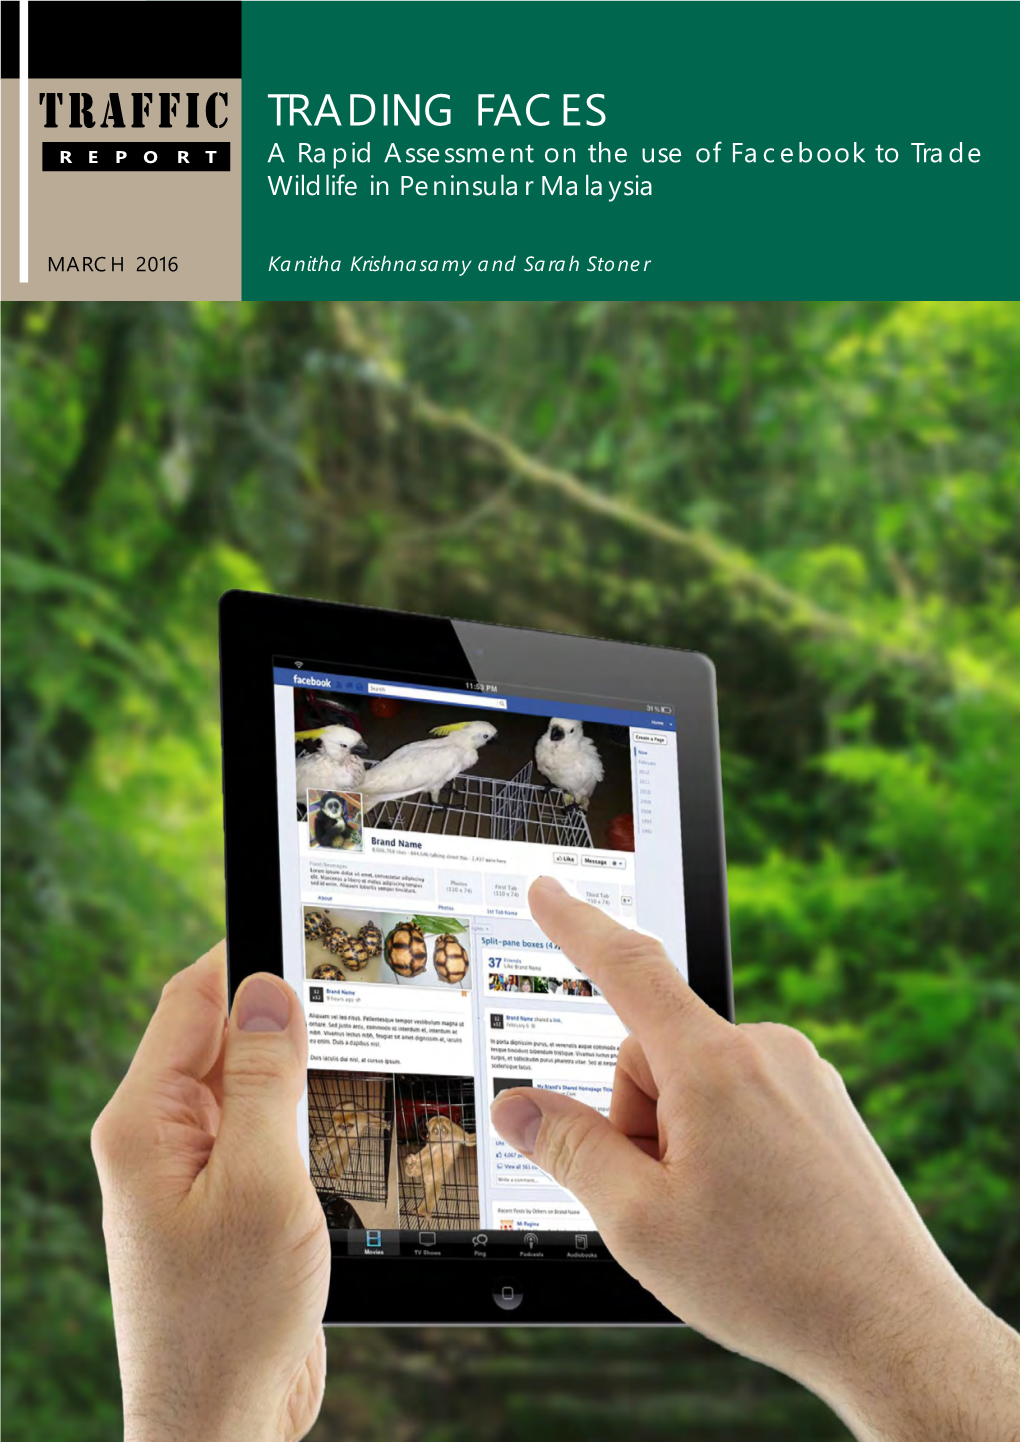 Trading Faces: a Rapid Assessment on the Use of Facebook to Trade Wildlife in Peninsular Malaysia